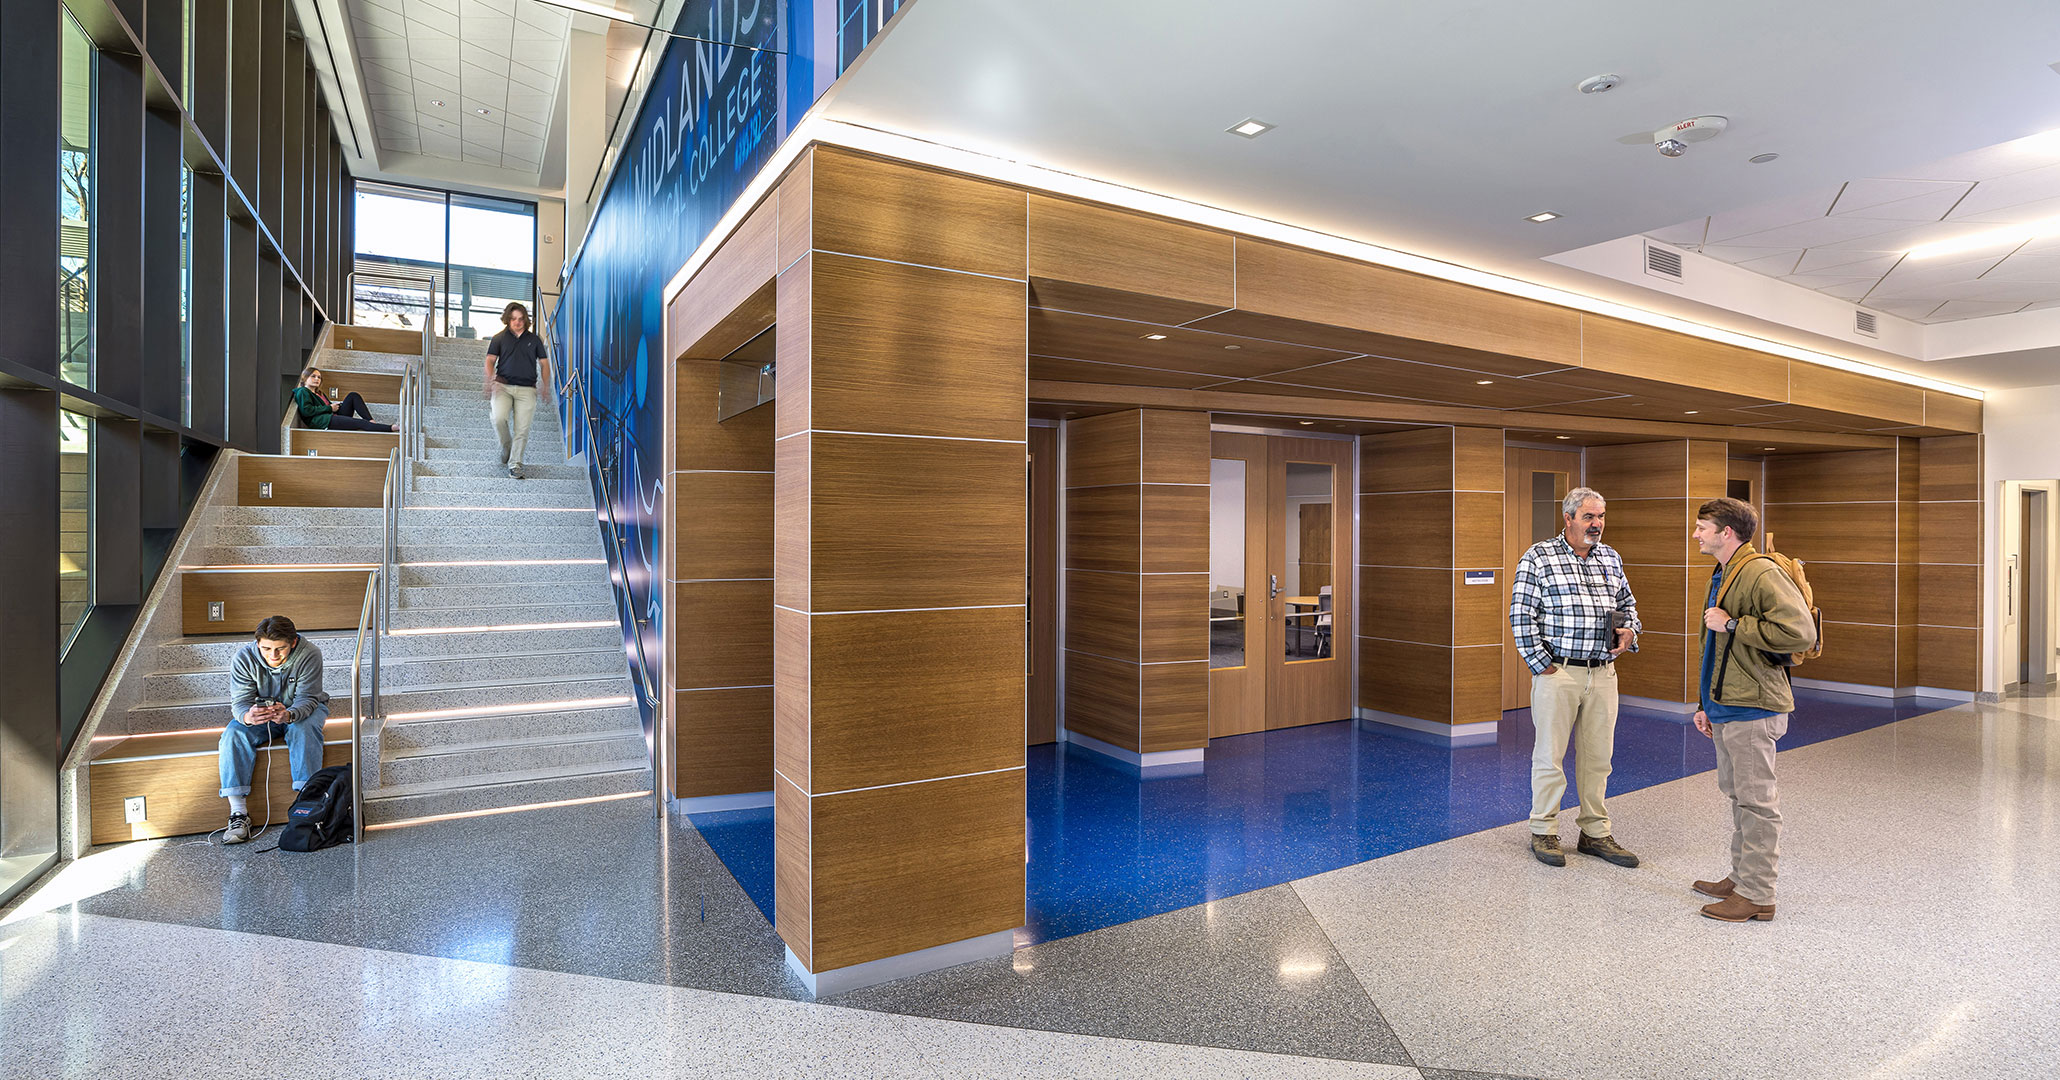 BOUDREAUX architects design higher education spaces that make students want to stay on campus